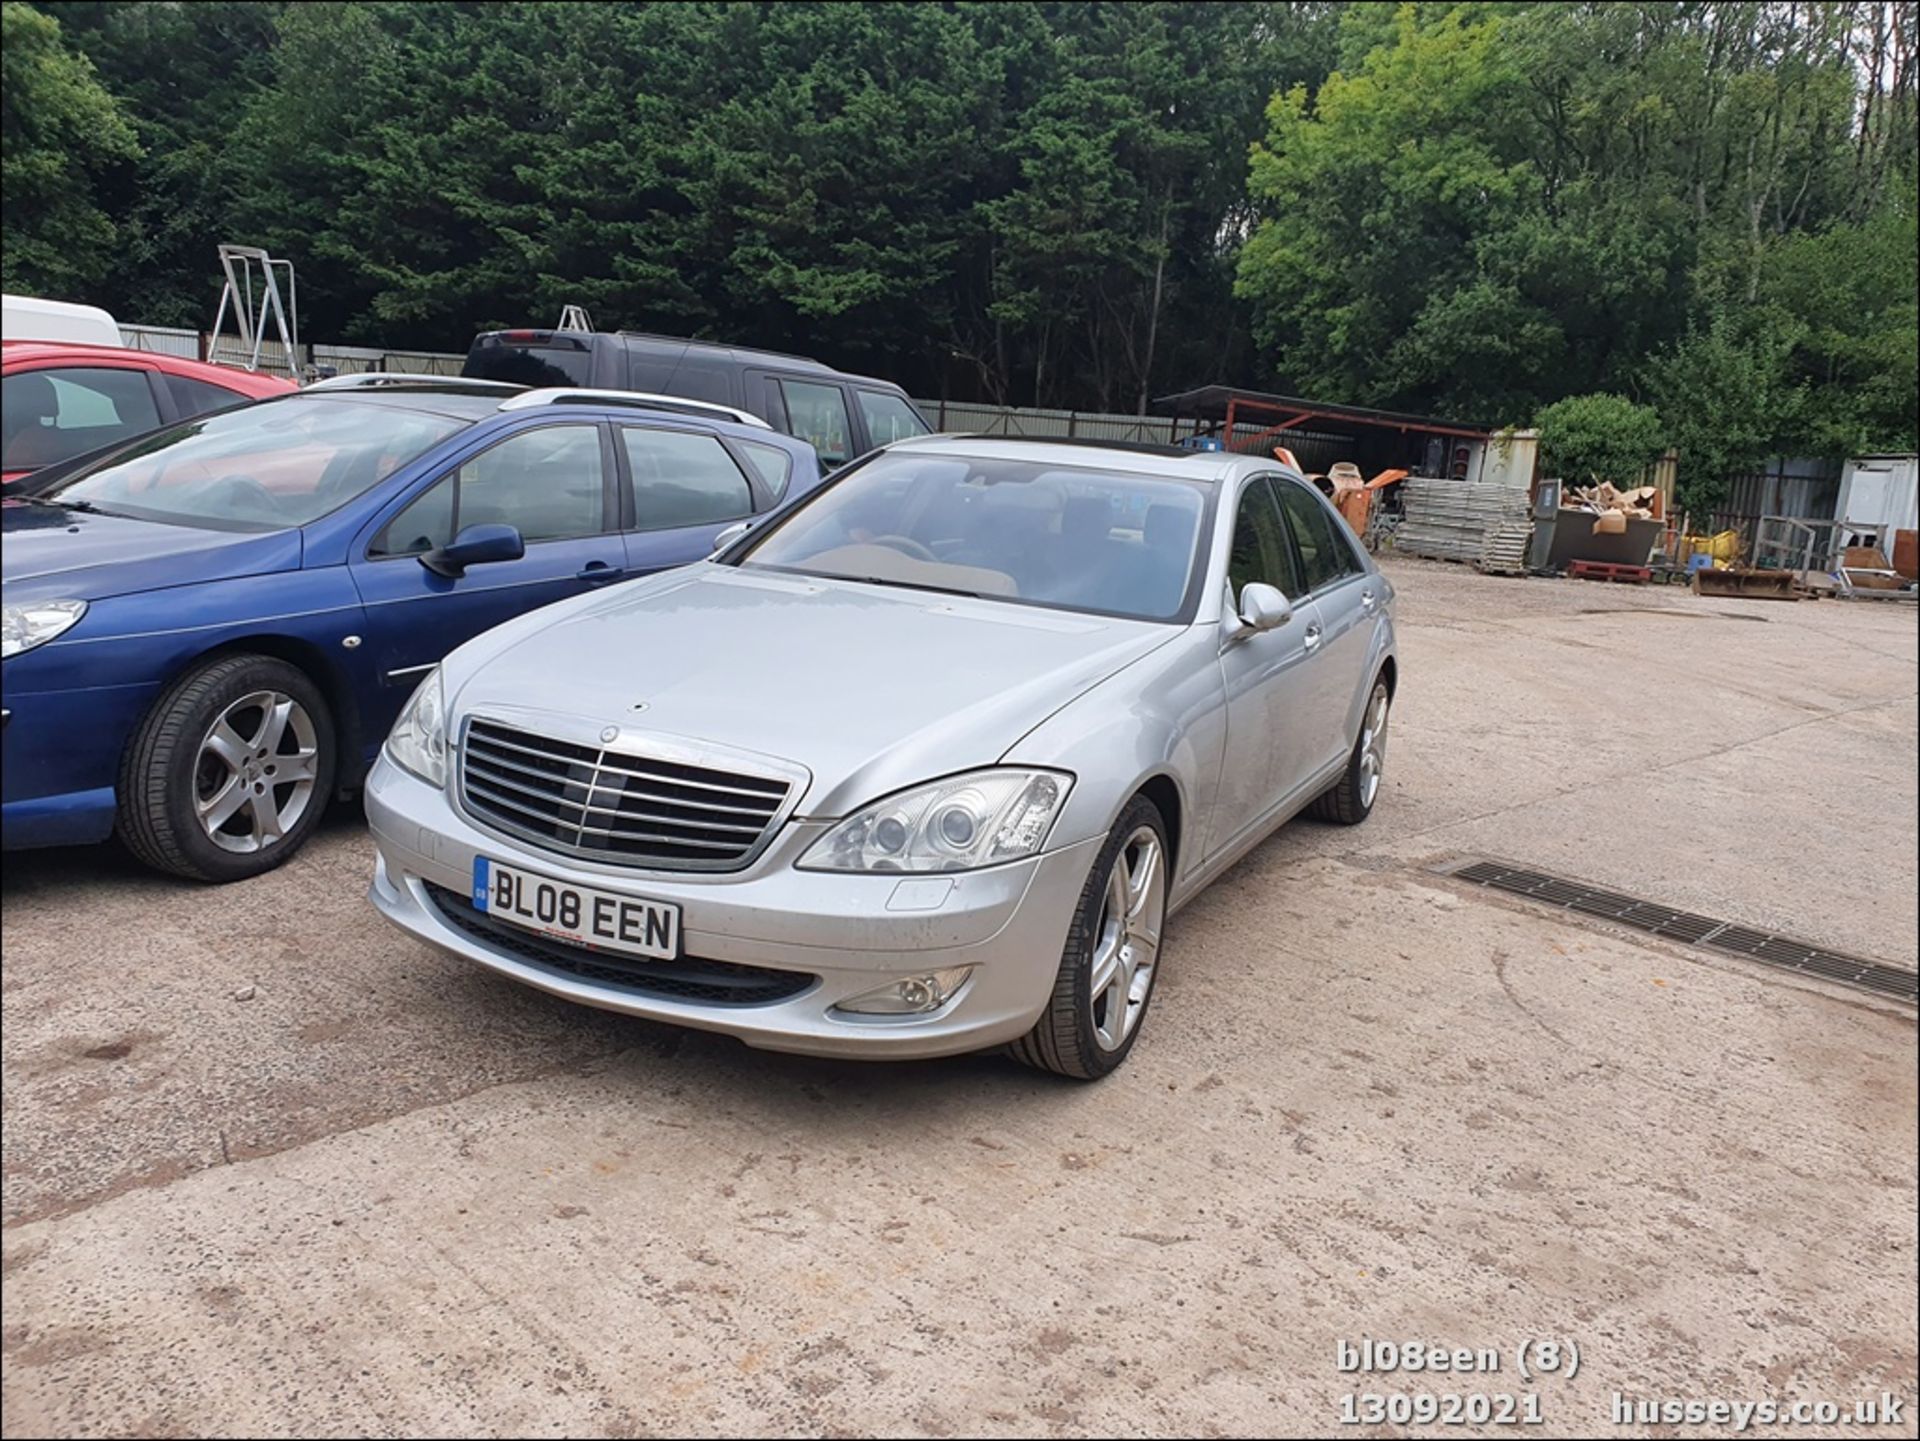 08/08 MERCEDES S320 CDI AUTO - 2987cc 4dr Saloon (Silver, 205k) - Image 8 of 16